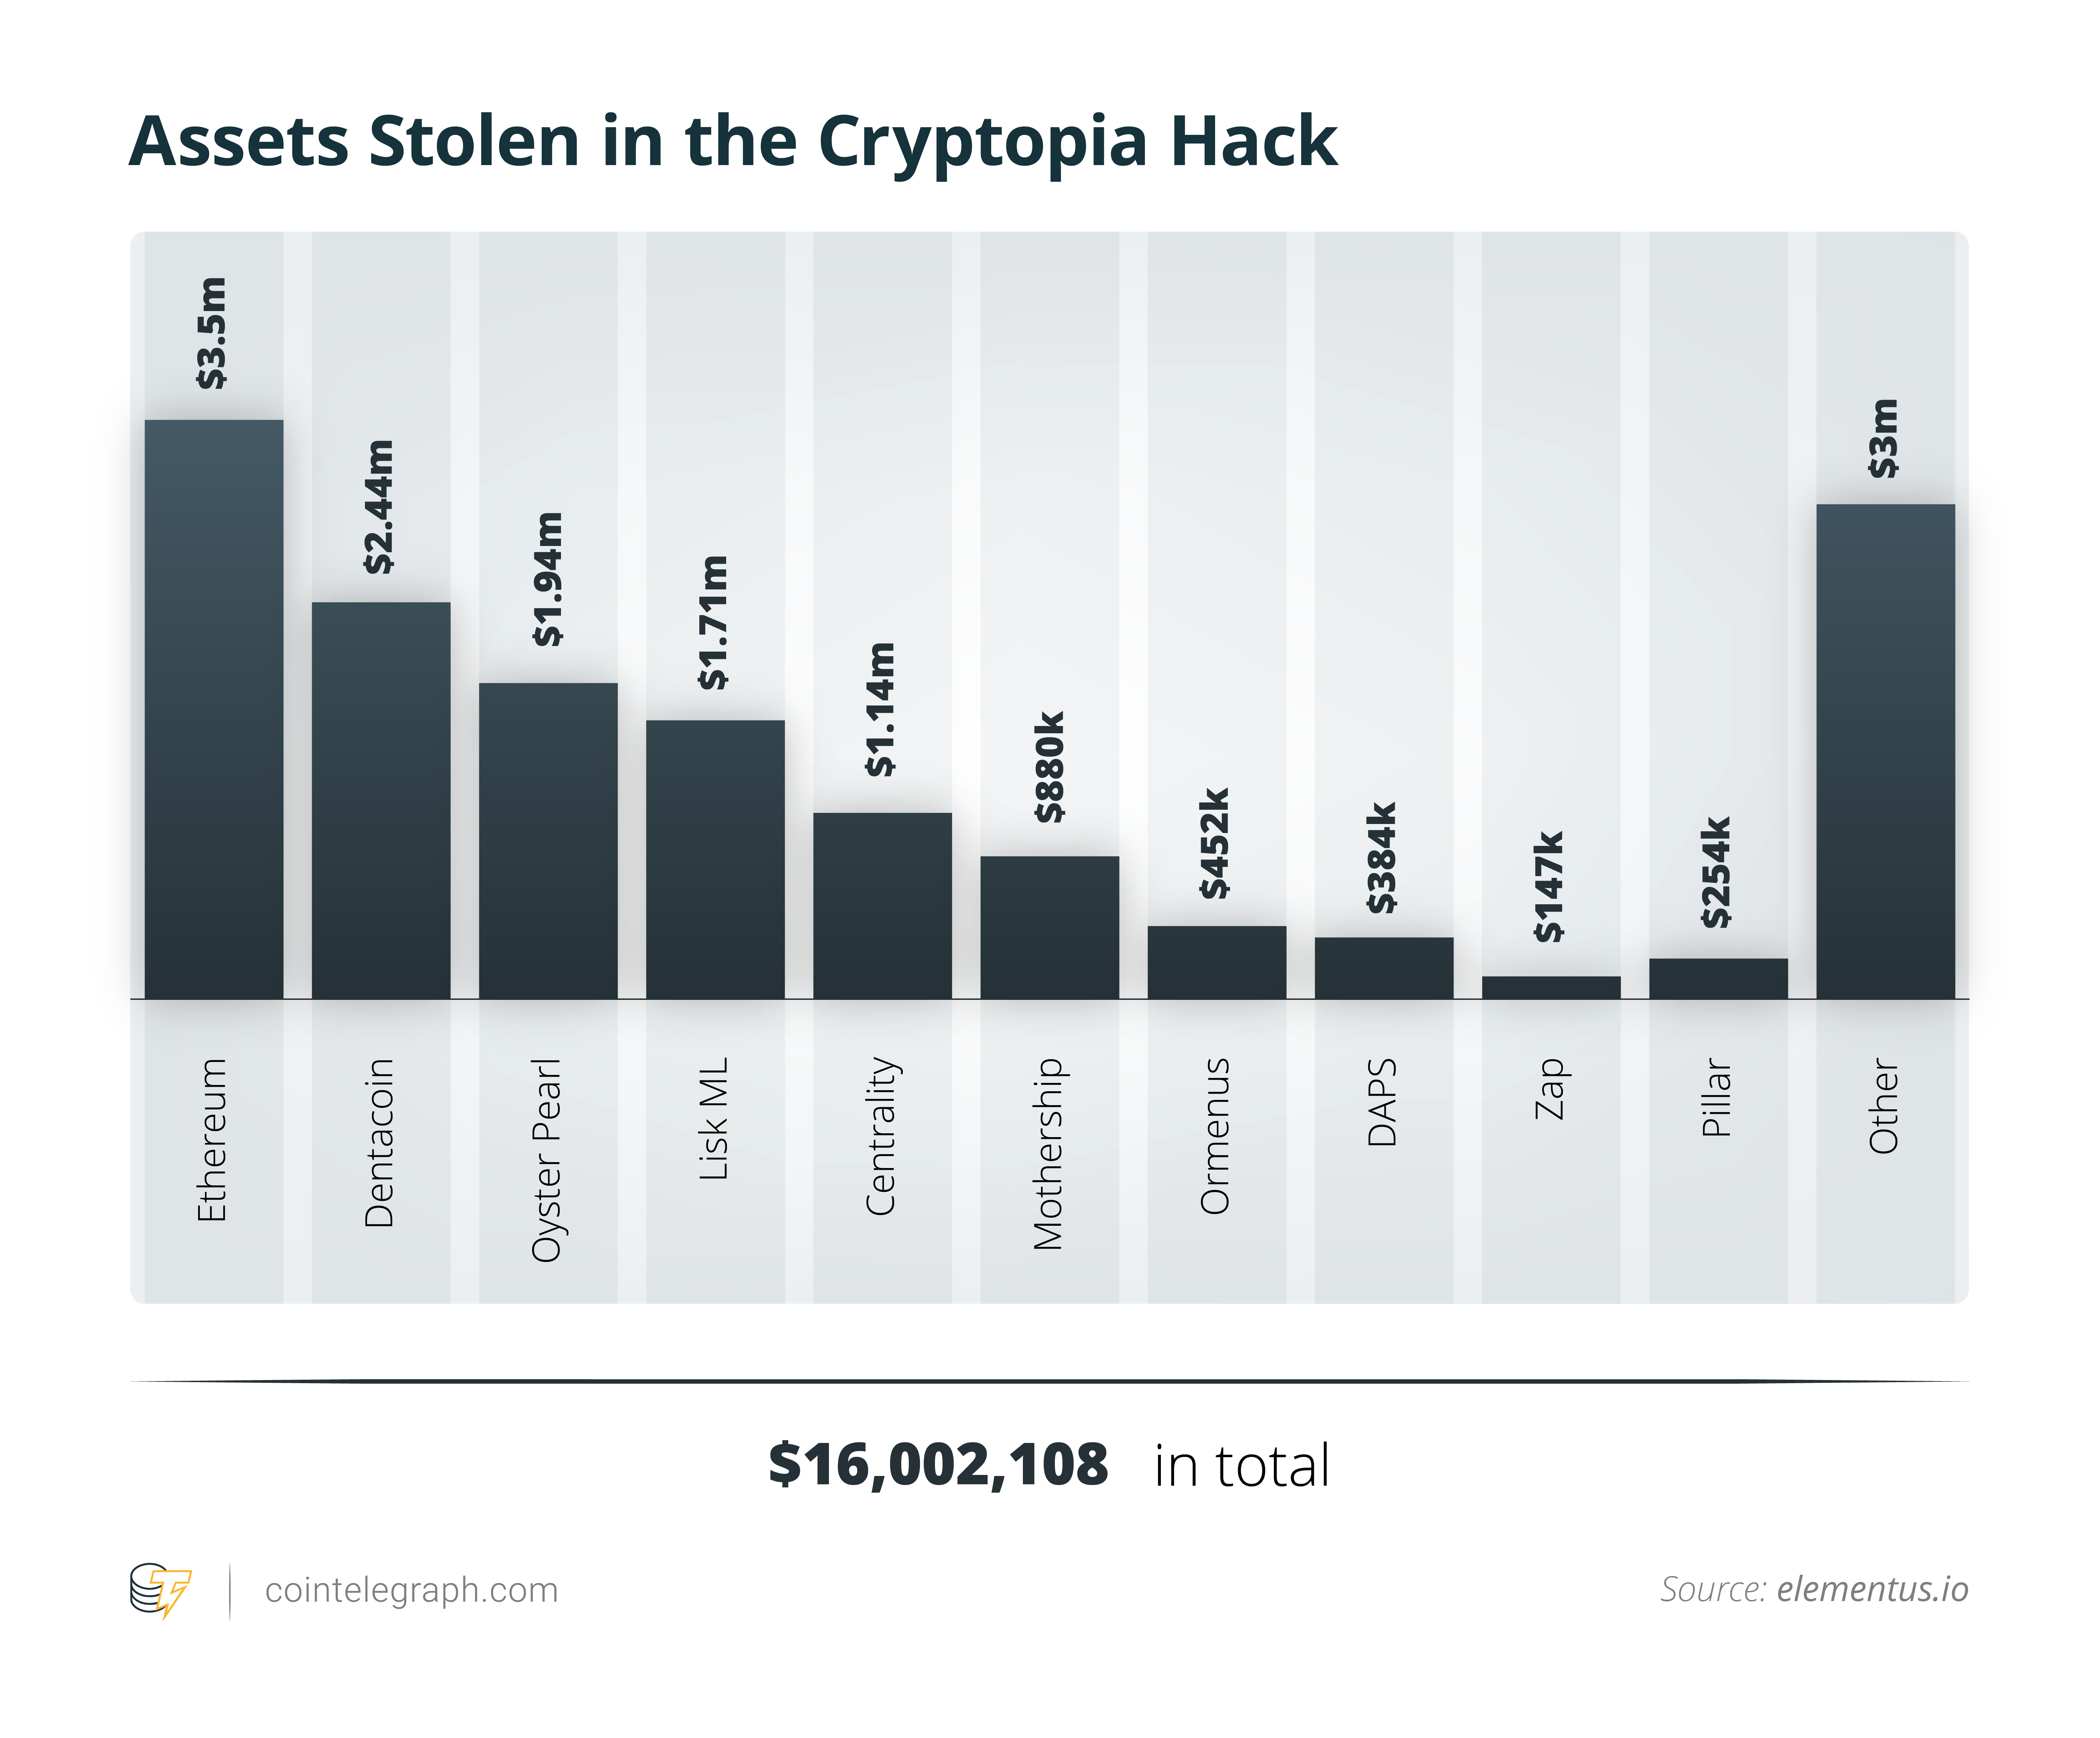 Value of crypto assets stolen from Cryptopia as of Jan. 19